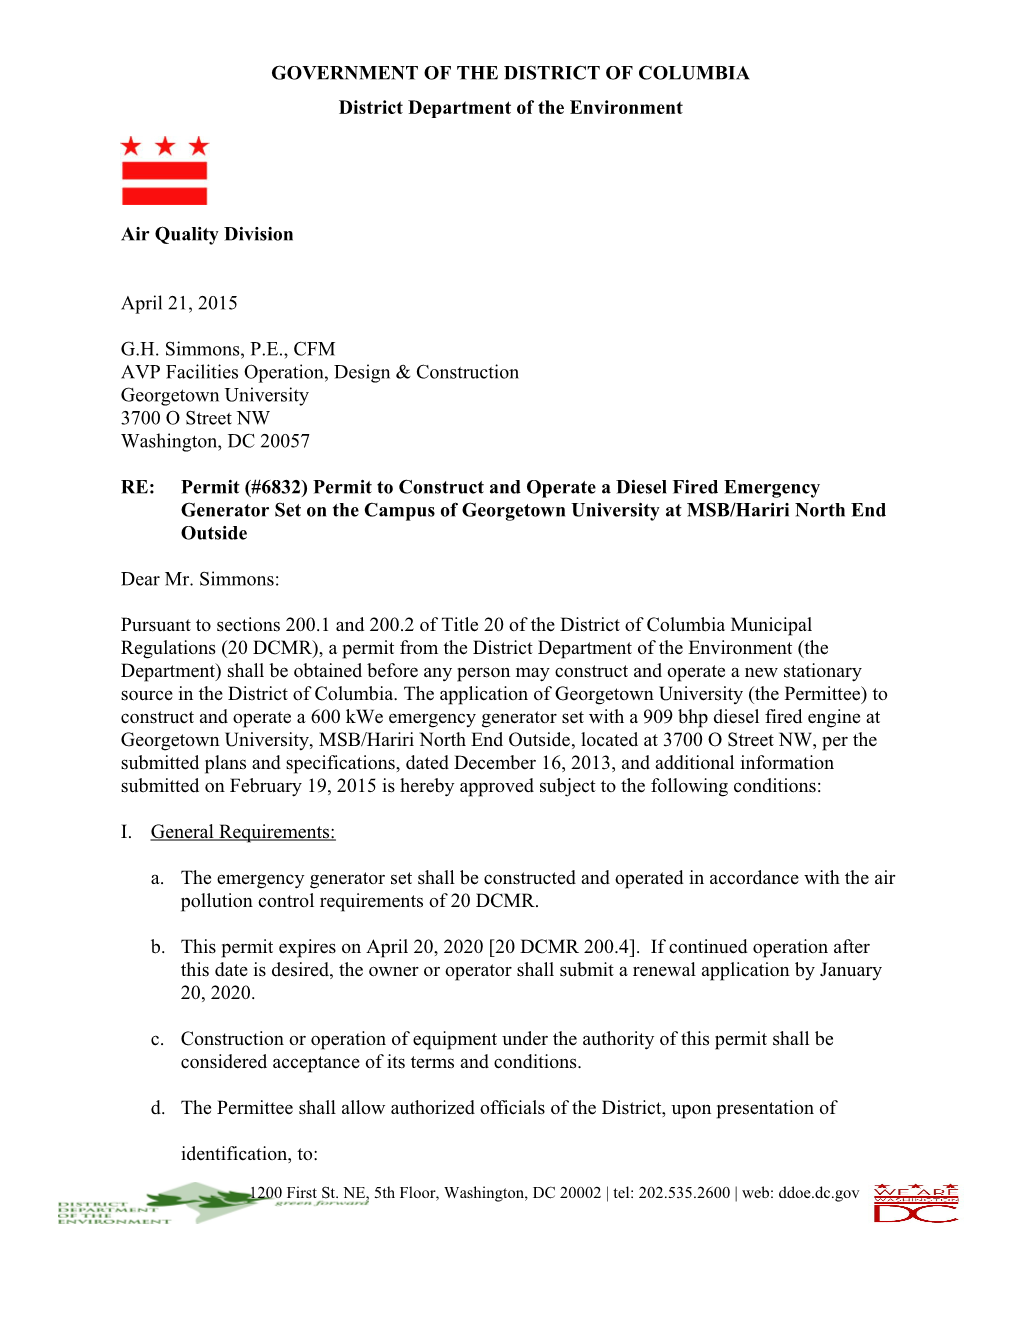 Permit (#6832) to Construct and Operate a Diesel Fired Emergency Generator